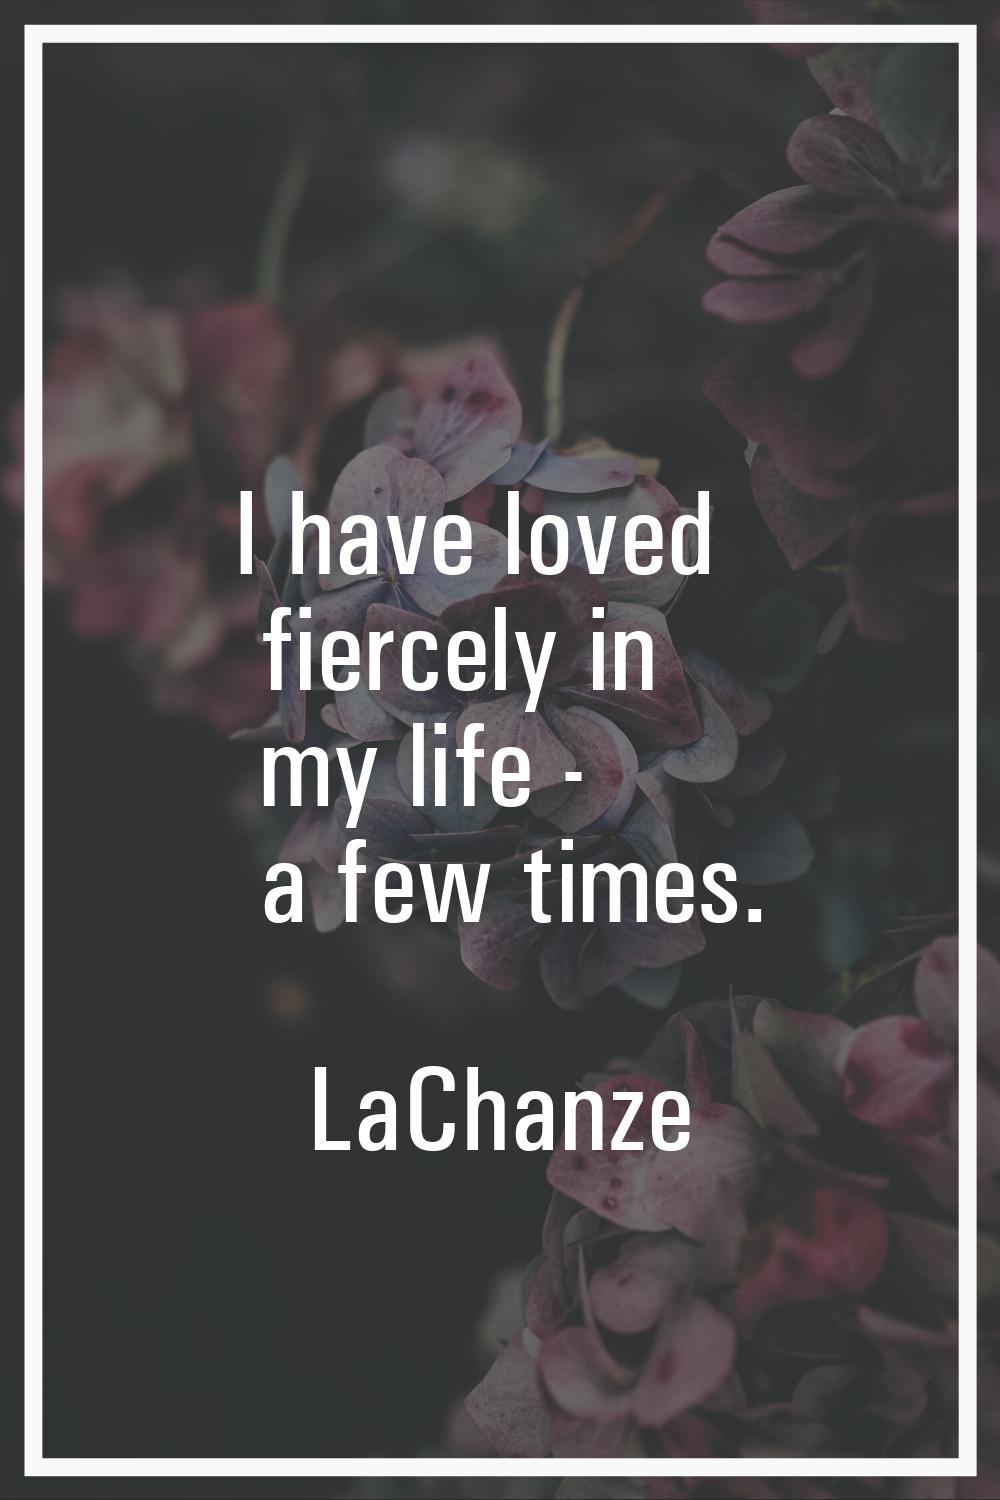 I have loved fiercely in my life - a few times.